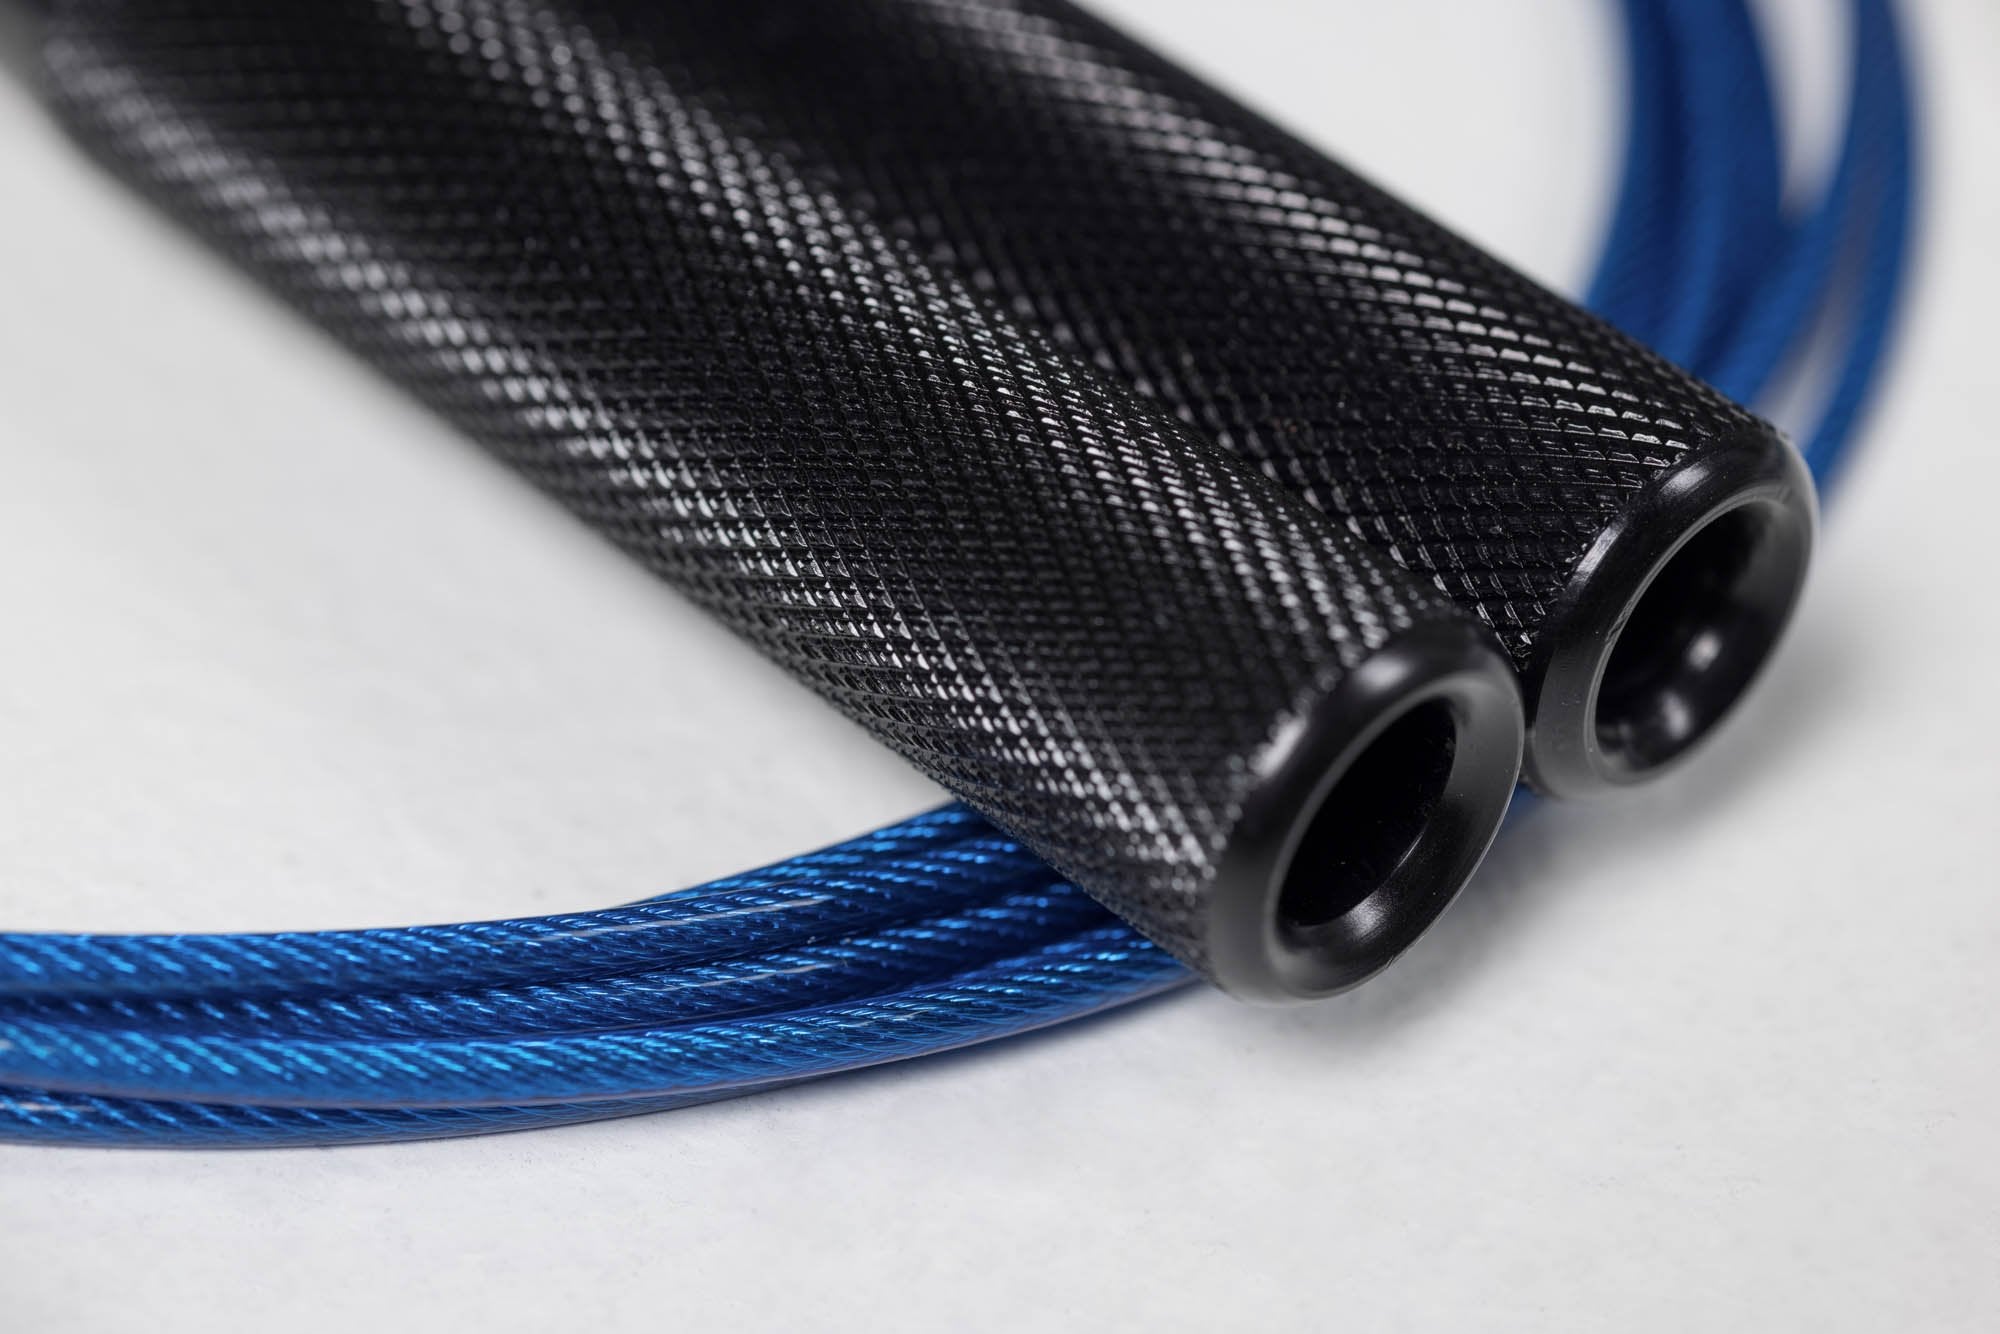 Competition Speed Rope Close Up of Black Handles and Knurl